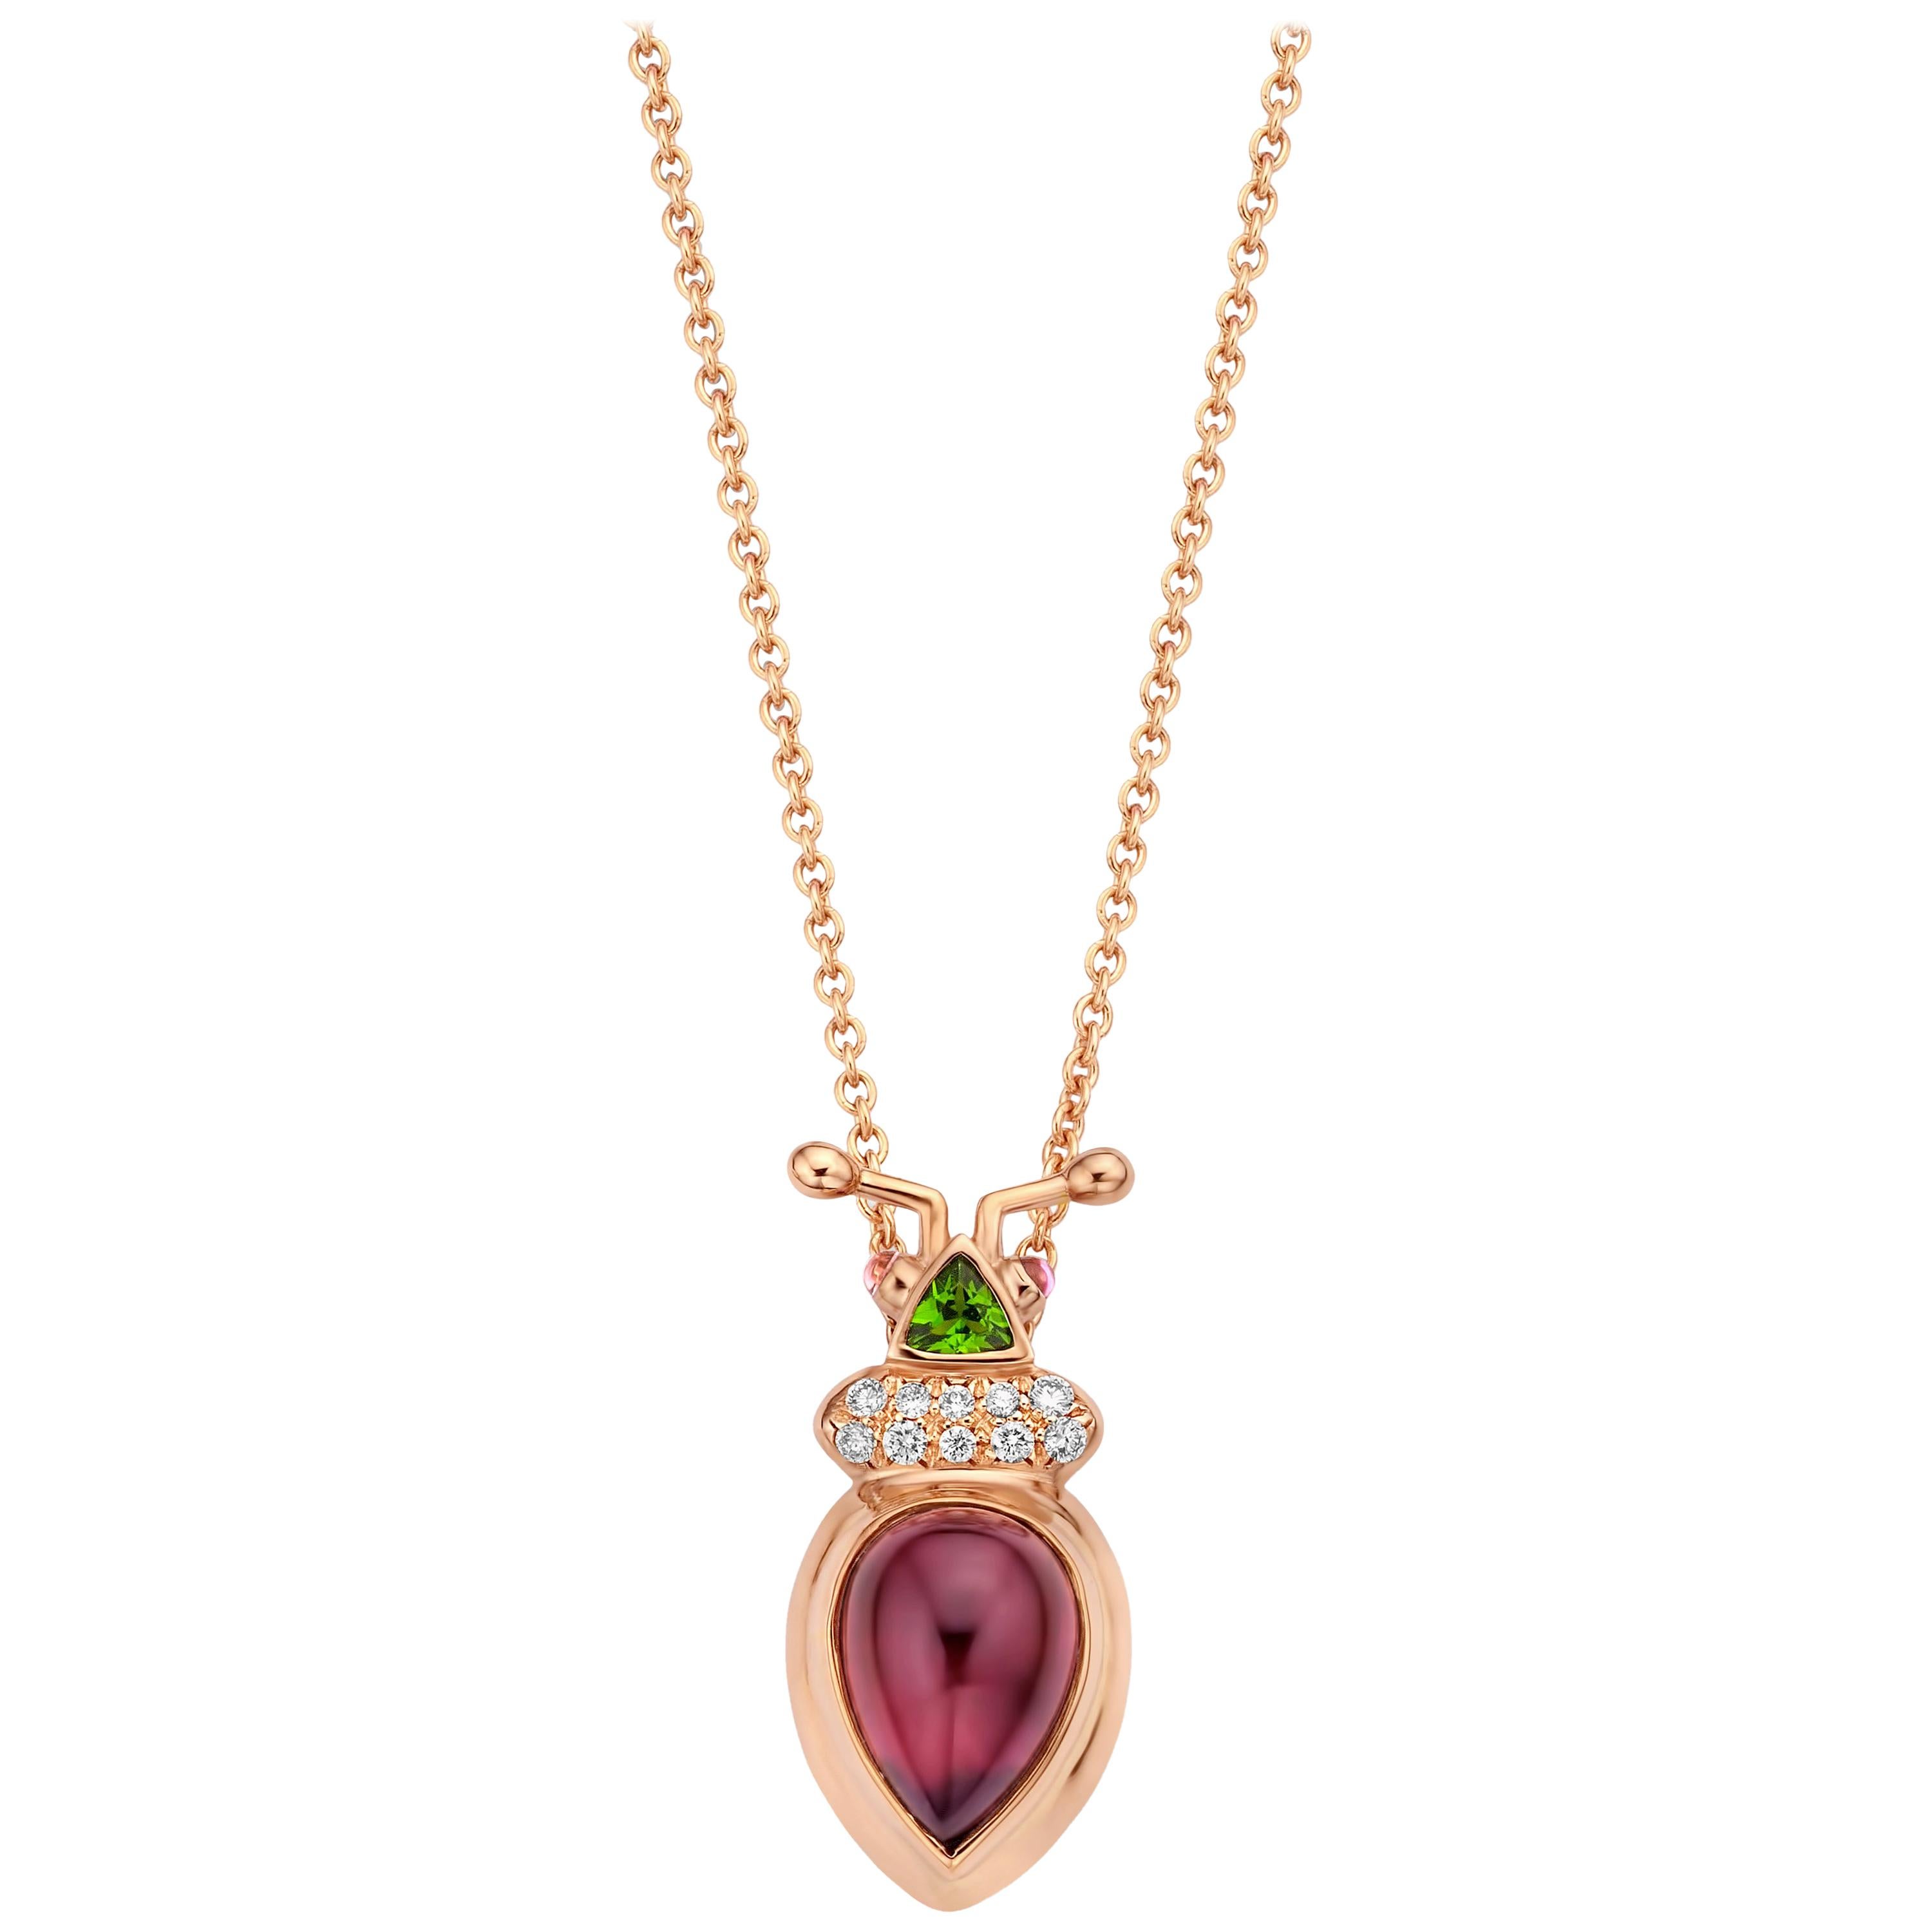 One of a kind lucky beetle necklace in 18K rose gold 10g set with the finest diamonds in brilliant cut 0,09Ct (VVS/DEF quality) and one natural, royal purple garnet in pear cabochon cut 3,21Ct. The head is set with a tsavorite in trillion cut and